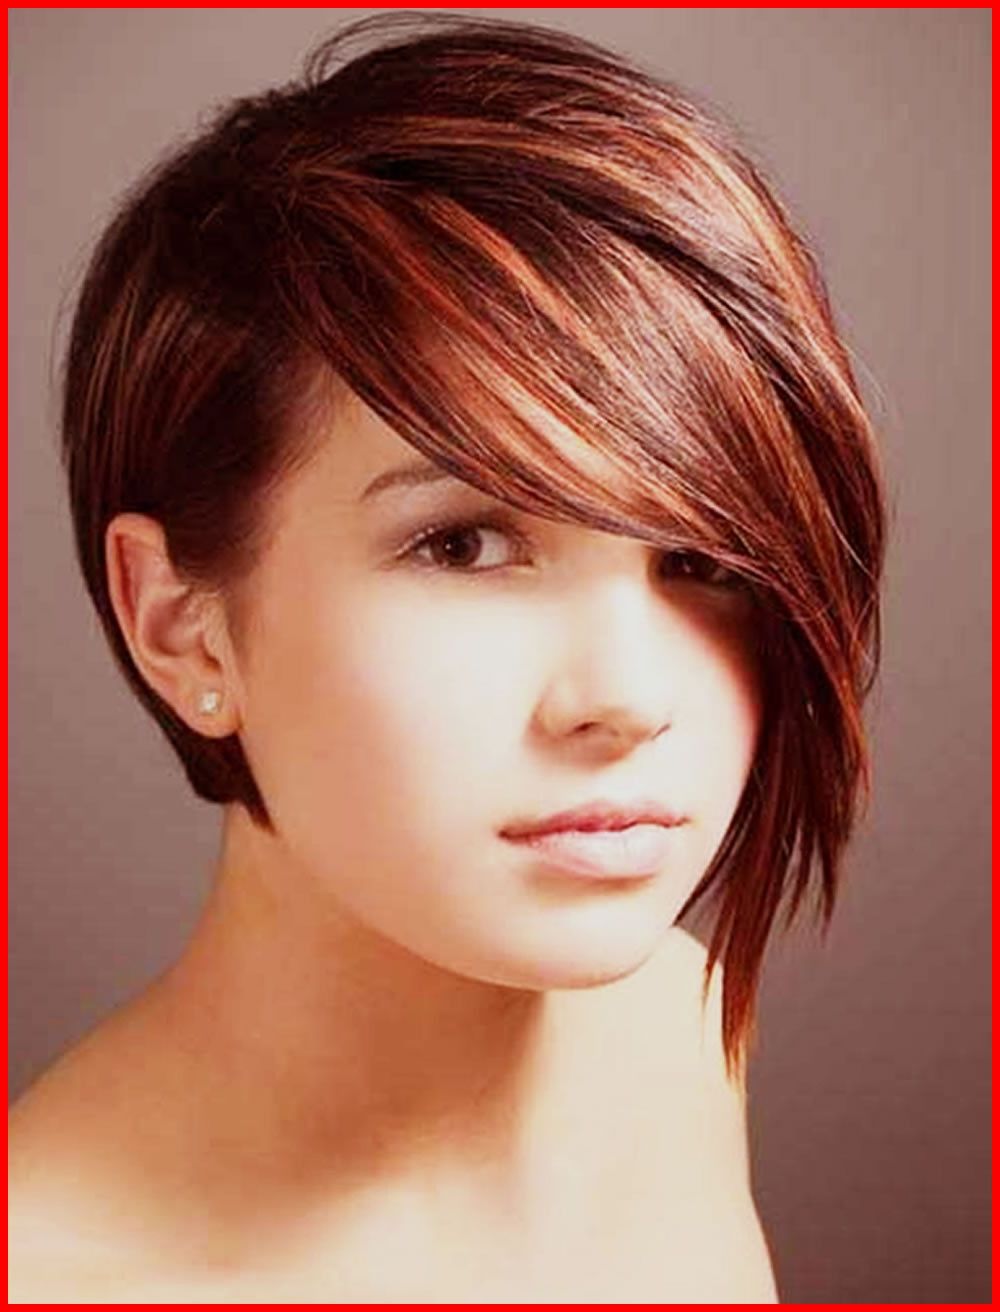 Short Hairstyle For Round Face 71104 Short Haircuts For Round Face Within Short Hairstyles For Chubby Faces (View 9 of 25)